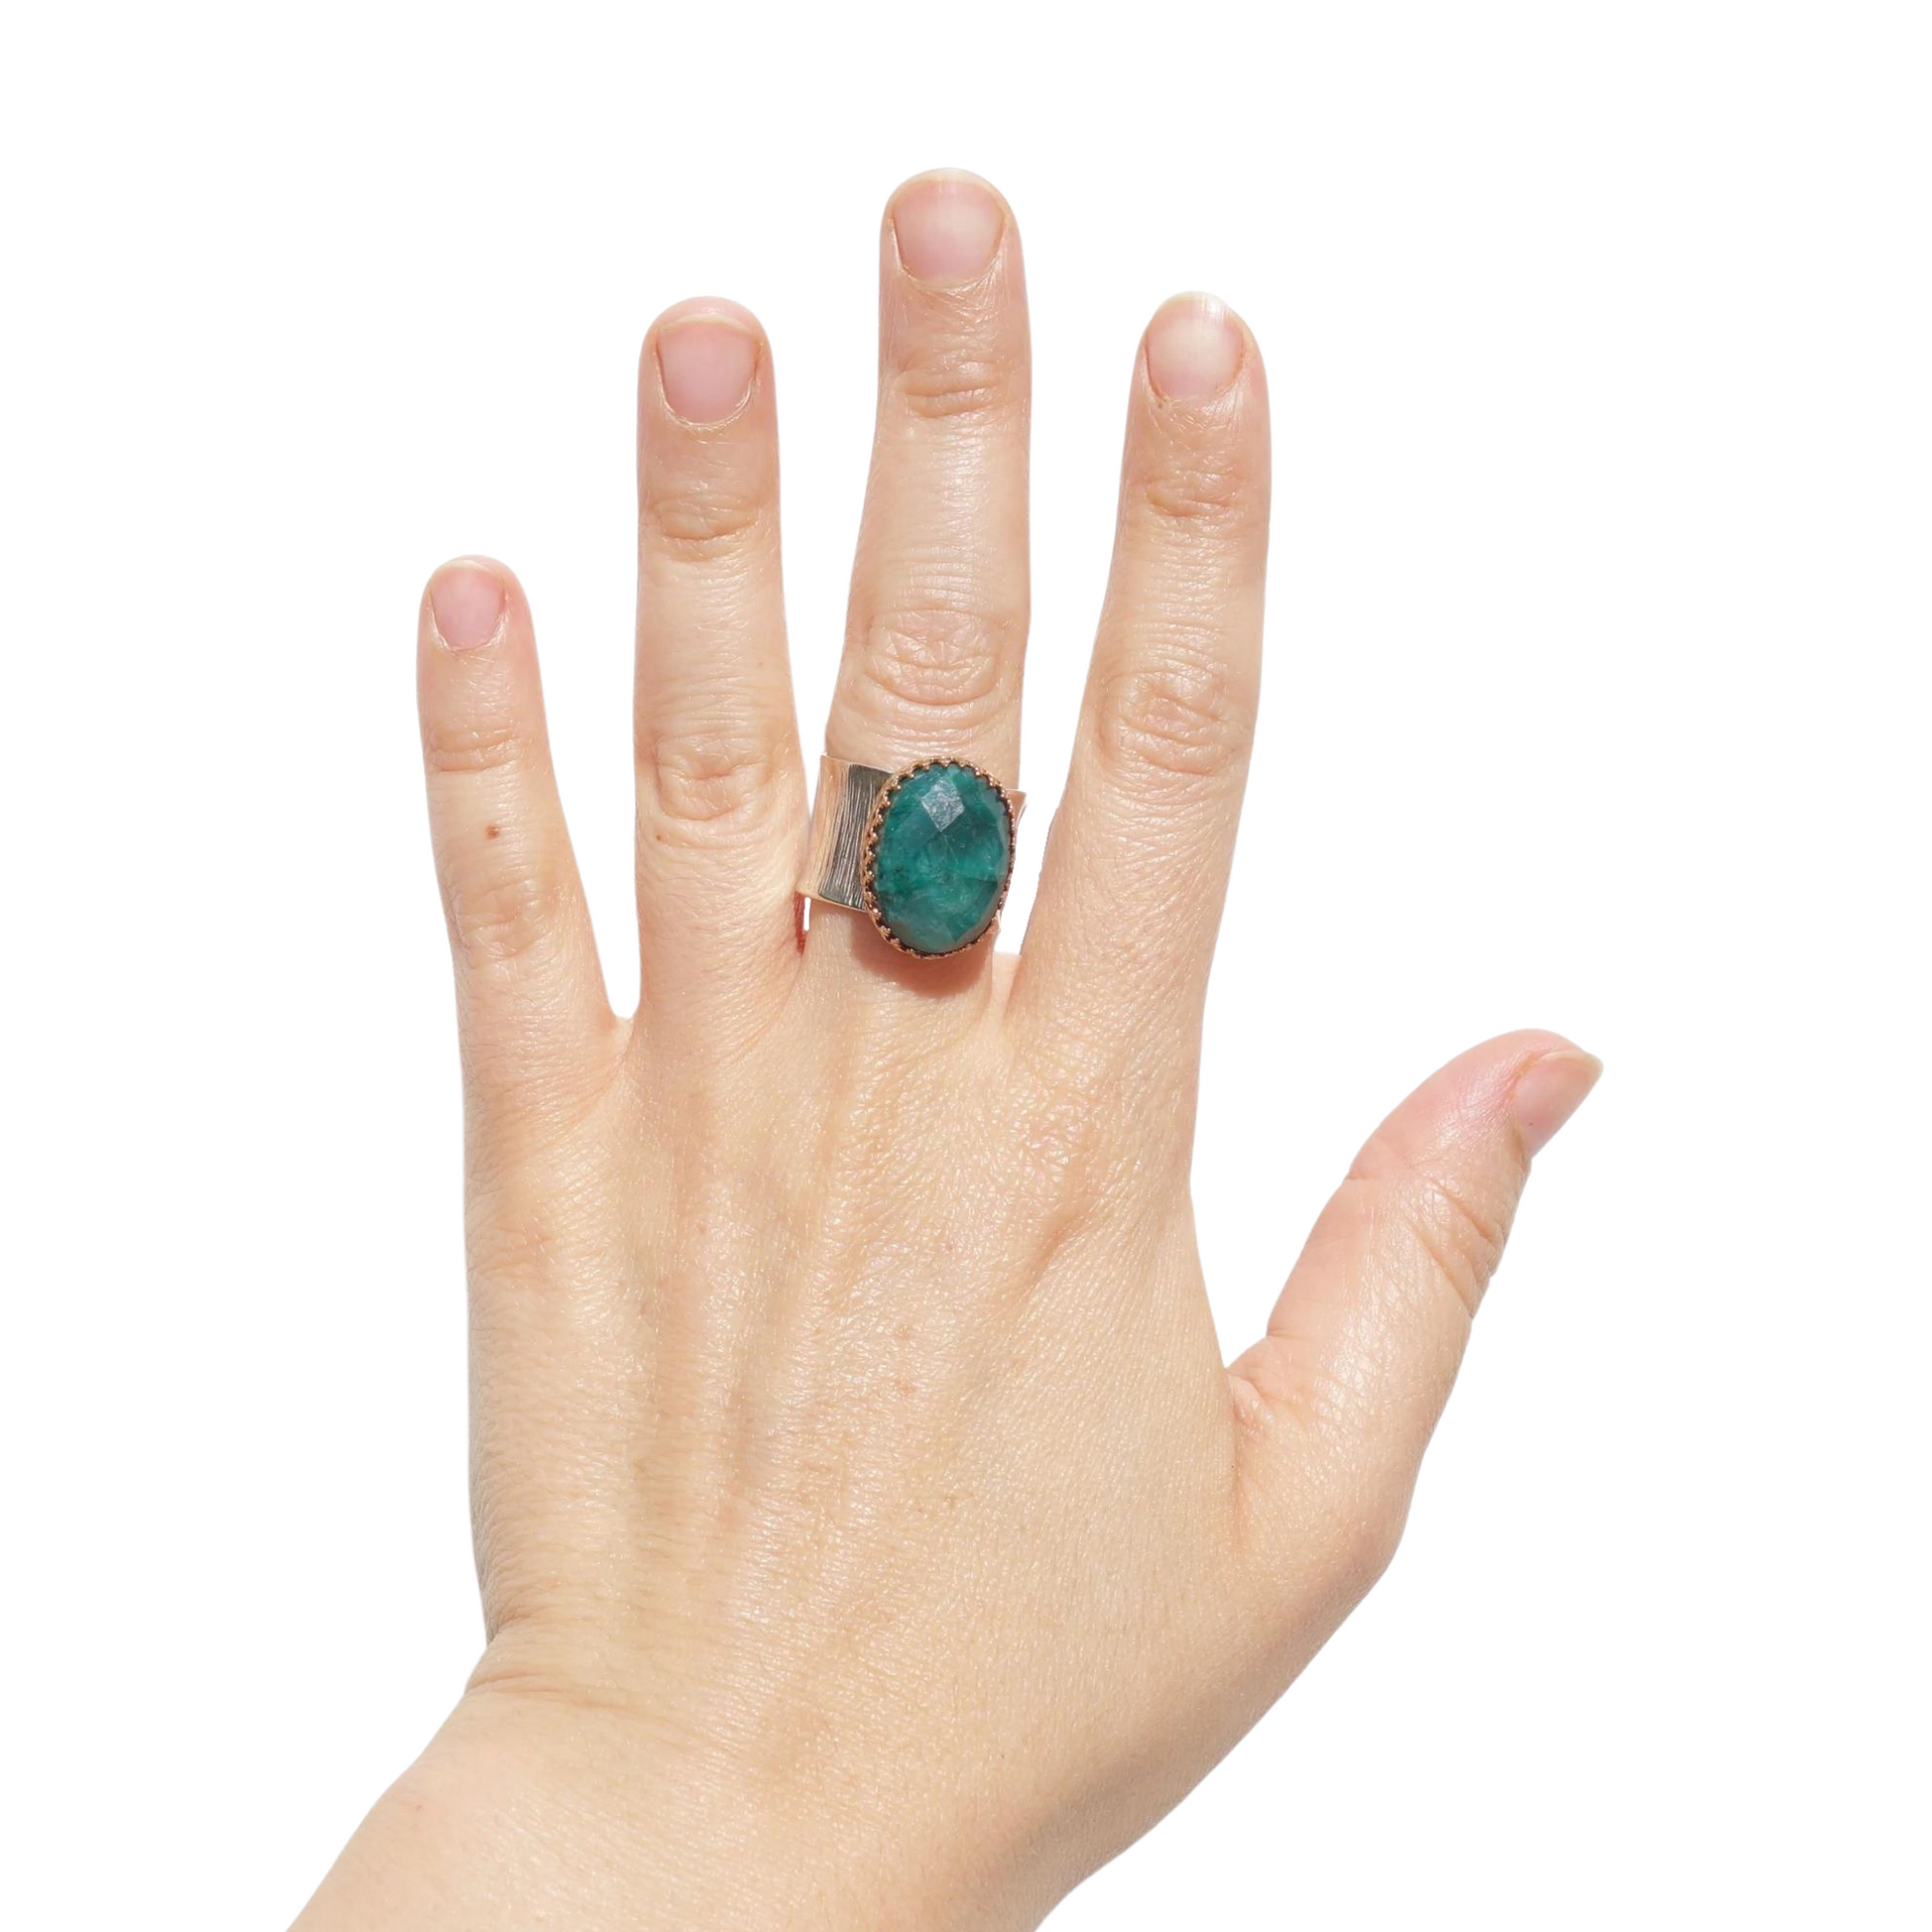 Natural Emerald Ring, Made of sterling silver, Yellow Gold, natural emerald gemstone, Big and Bold Ring, Oval Emerald, Unisex Cocktail ring, Israeli jewelry, Israeli design, Emerald Ring, Wide ring, BIG Emerald Ring, Textured ring, Gift for her, Men